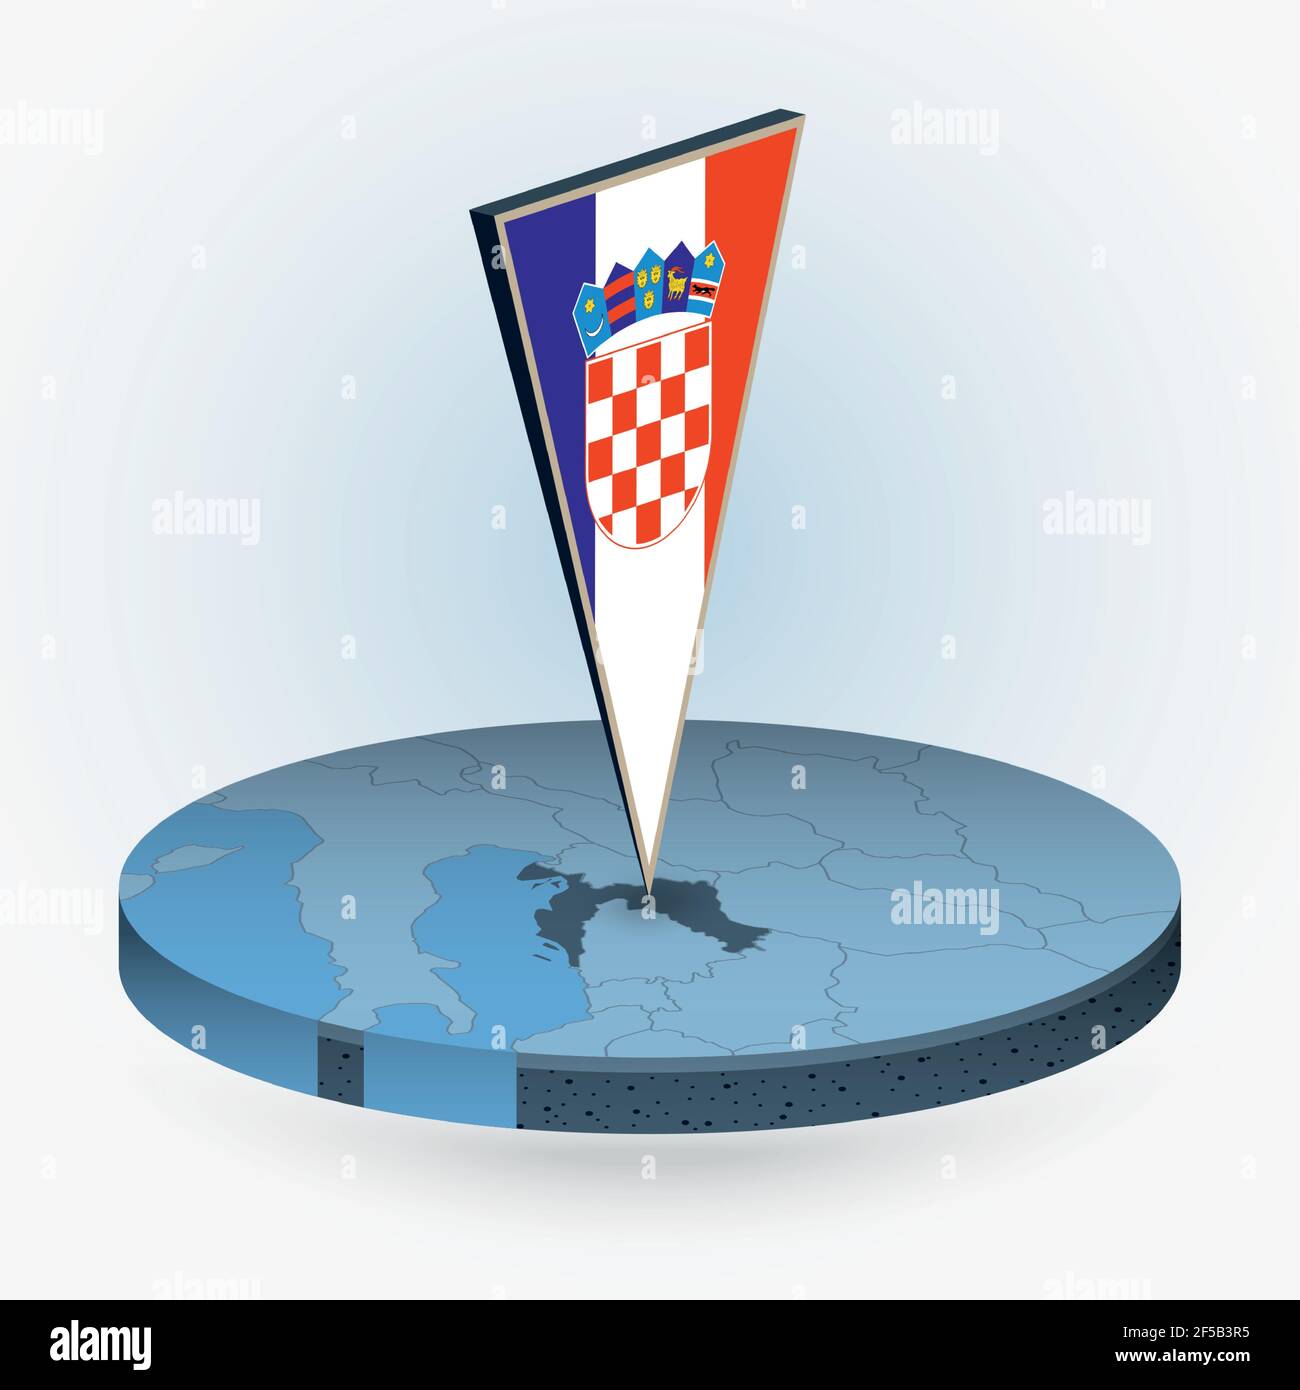 Croatia map in round isometric style with triangular 3D flag of Croatia, vector map in blue color. Stock Vector